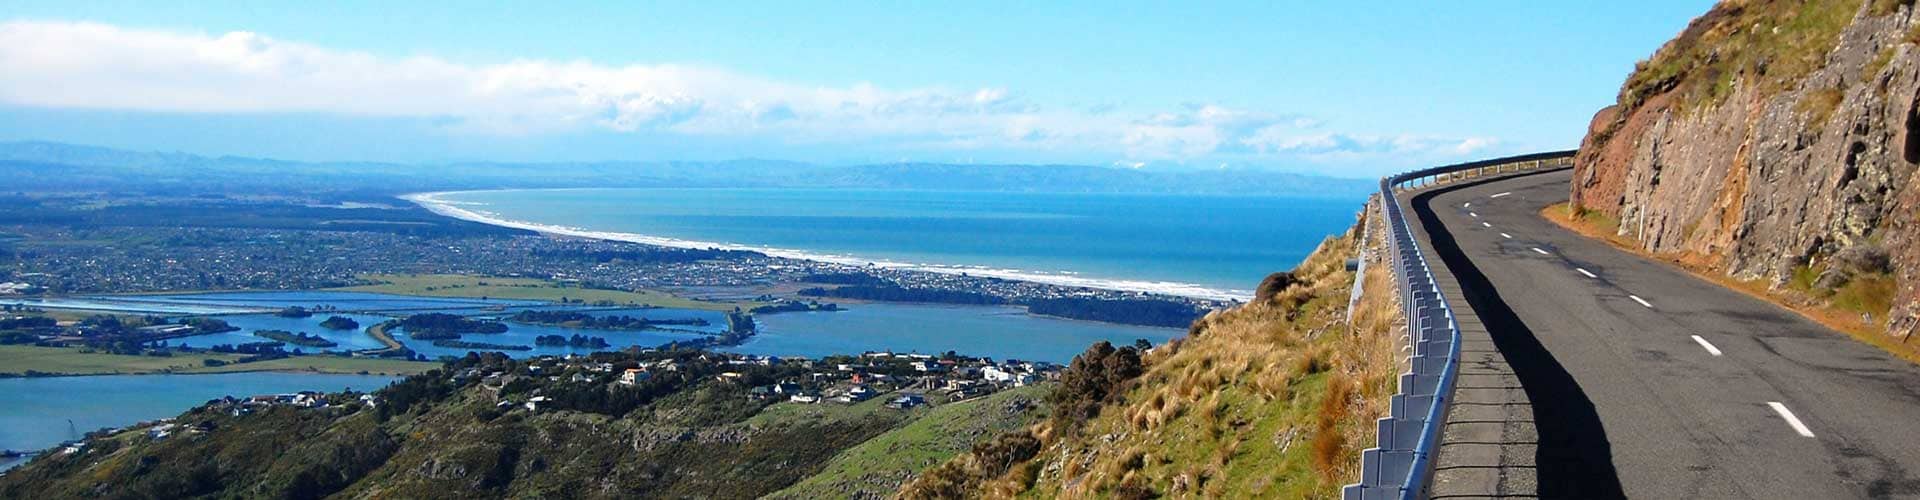 View of Christchurch from the Summit Road